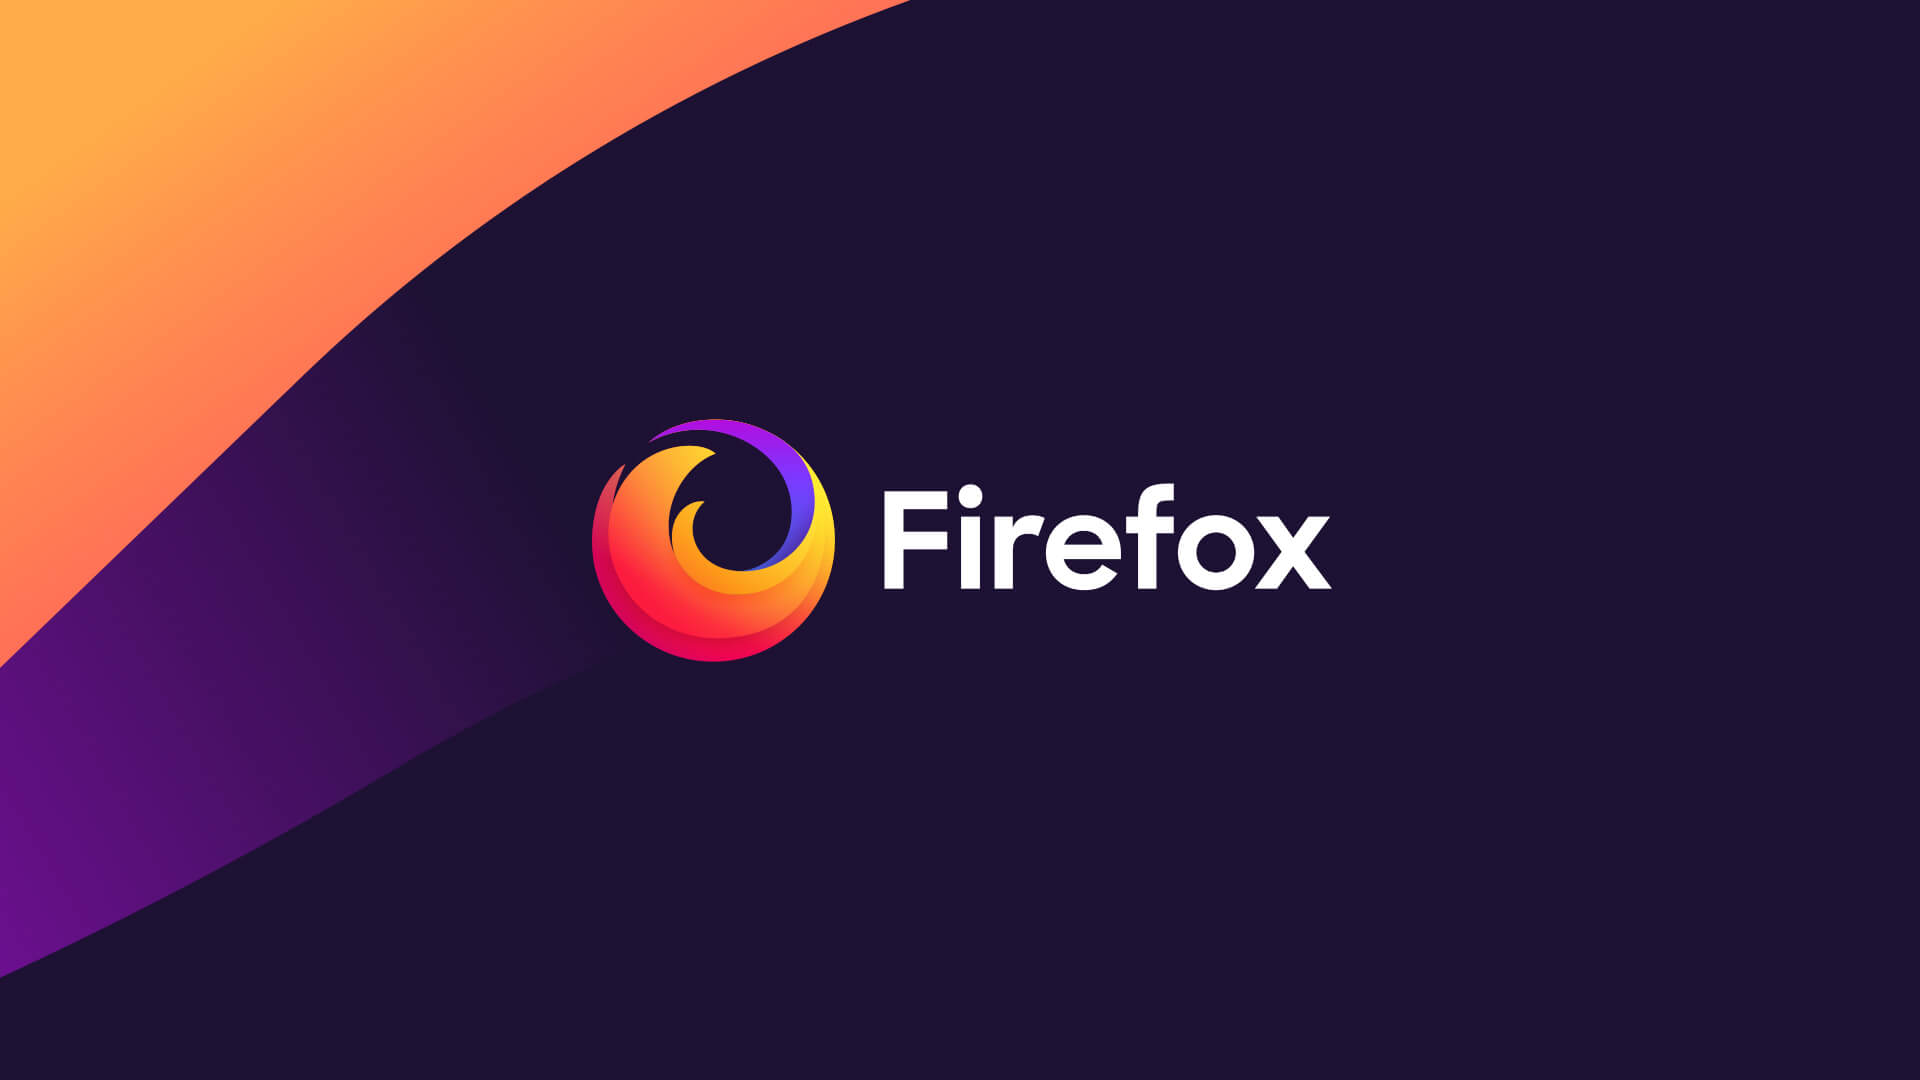 Germany’s Cybersecurity Agency Recommends Firefox as the Most Secure Browser